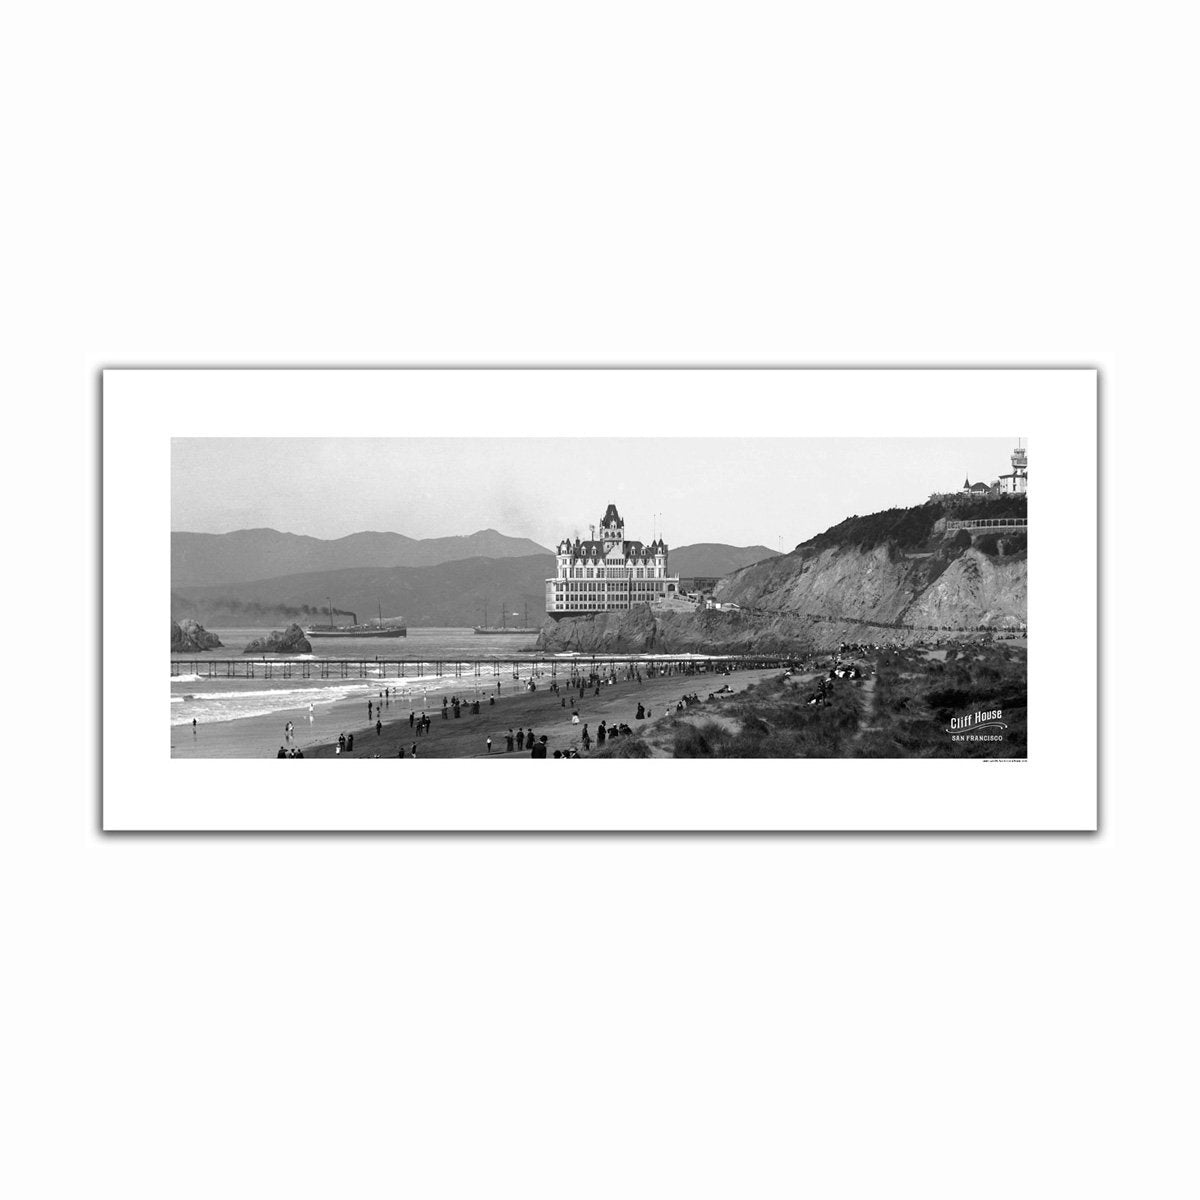 16 x 36 inch panoramic poster of San Francisco's Victorian Cliff House, black-and-white photograph.